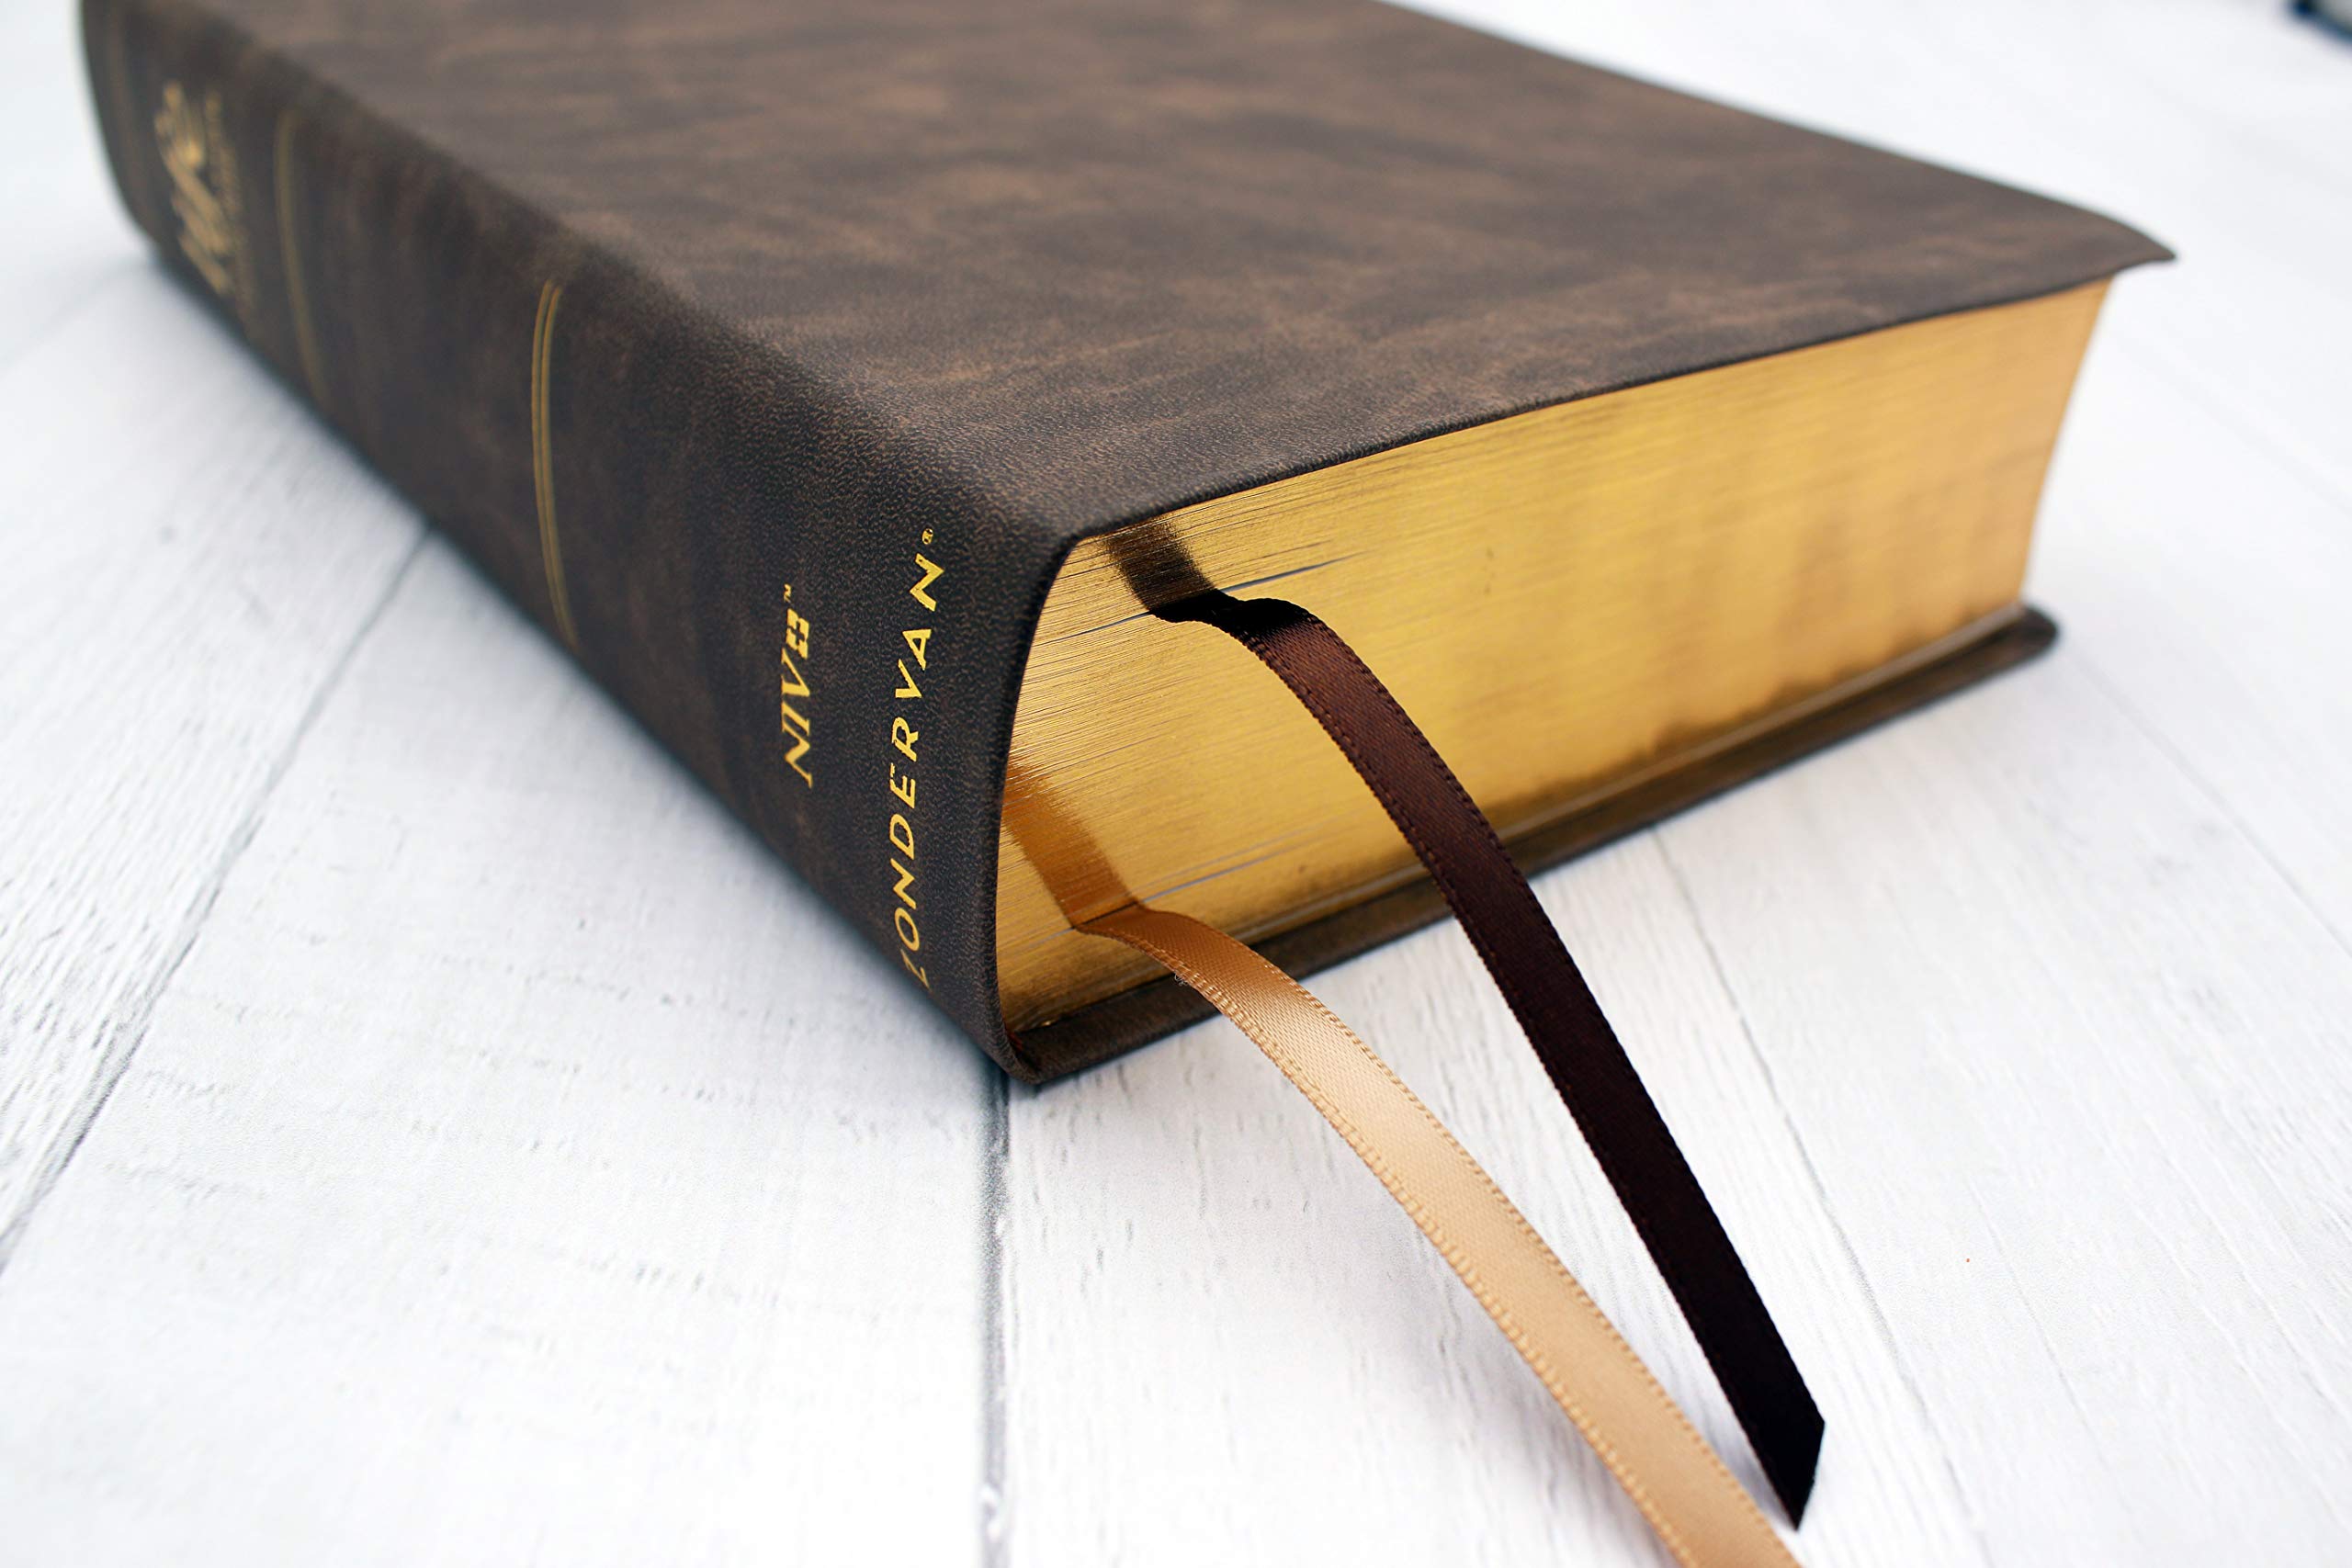 NIV, Life Application Study Bible, Third Edition, Bonded Leather, Brown, Red Letter